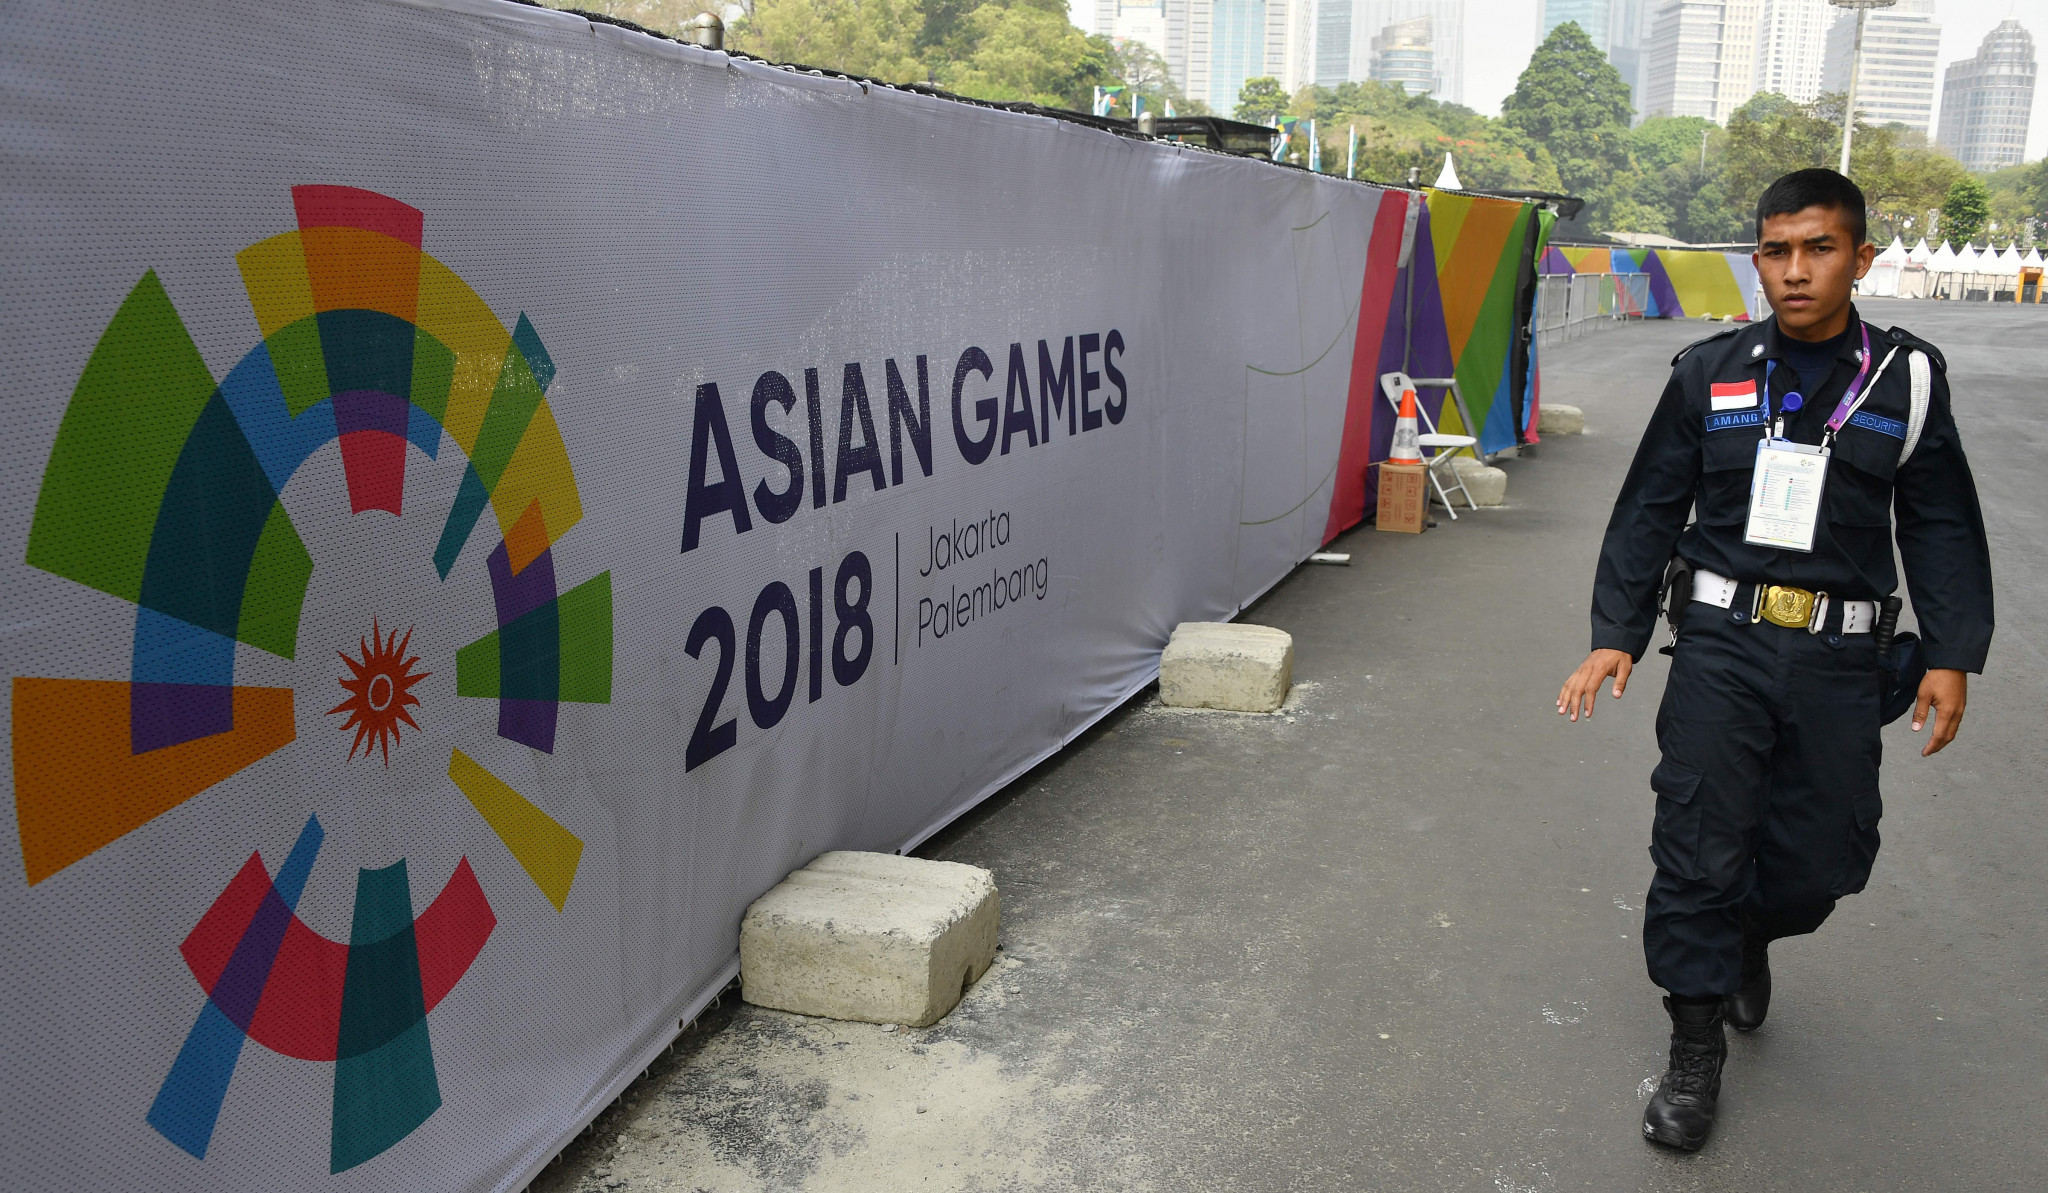 Asian Games will be "haze free" despite forest fire threat, say Government